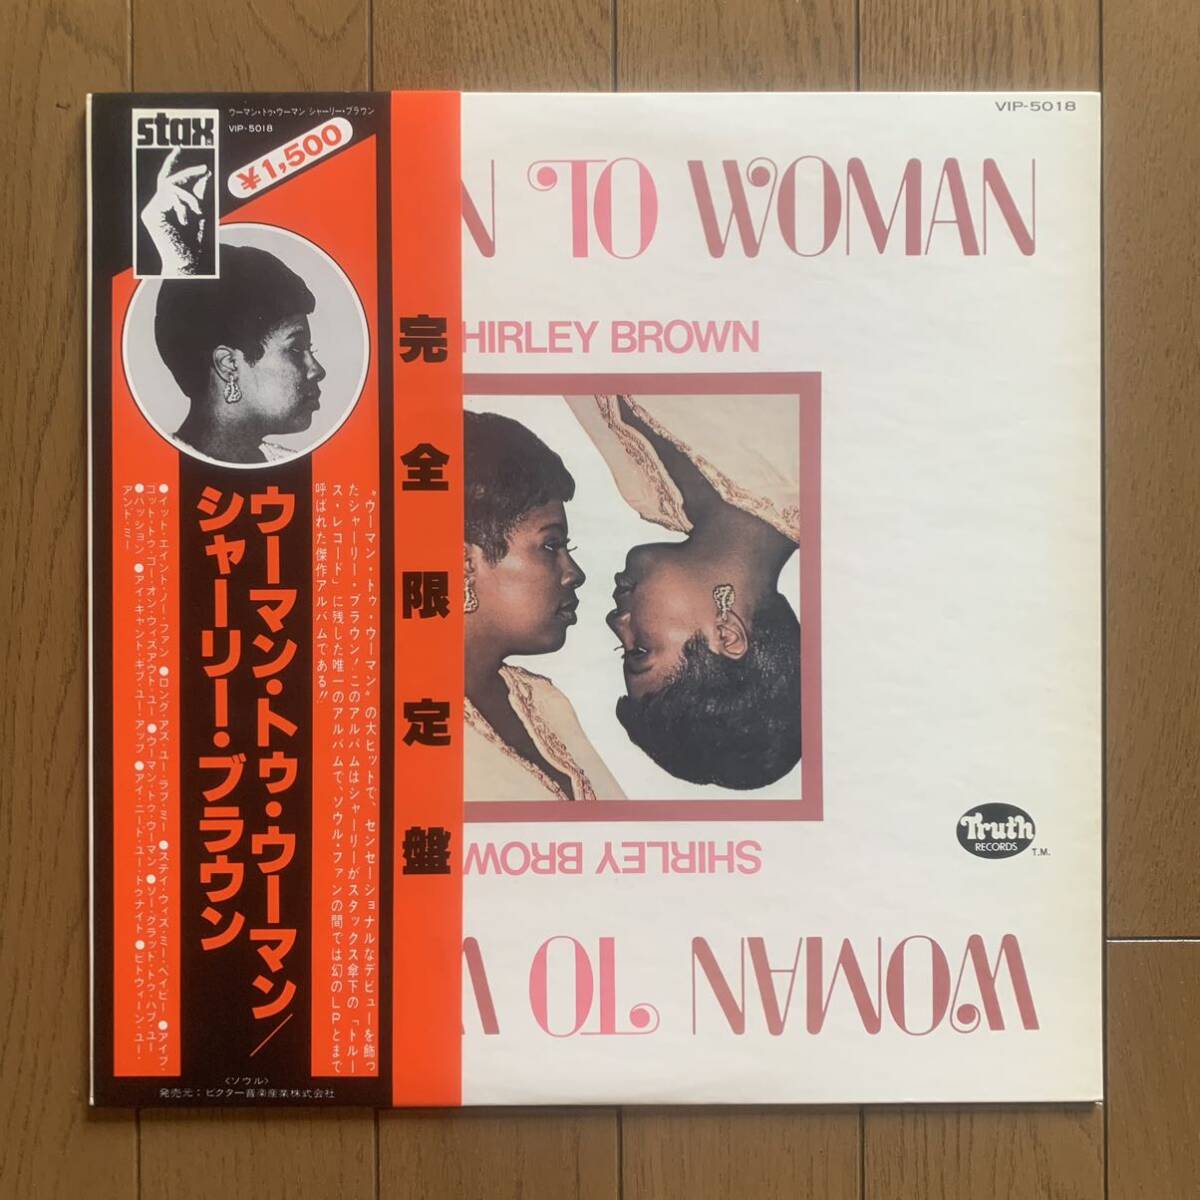 SHIRLEY BROWN / WOMAN TO WOMAN (Stax) 国内盤 - 帯_画像1